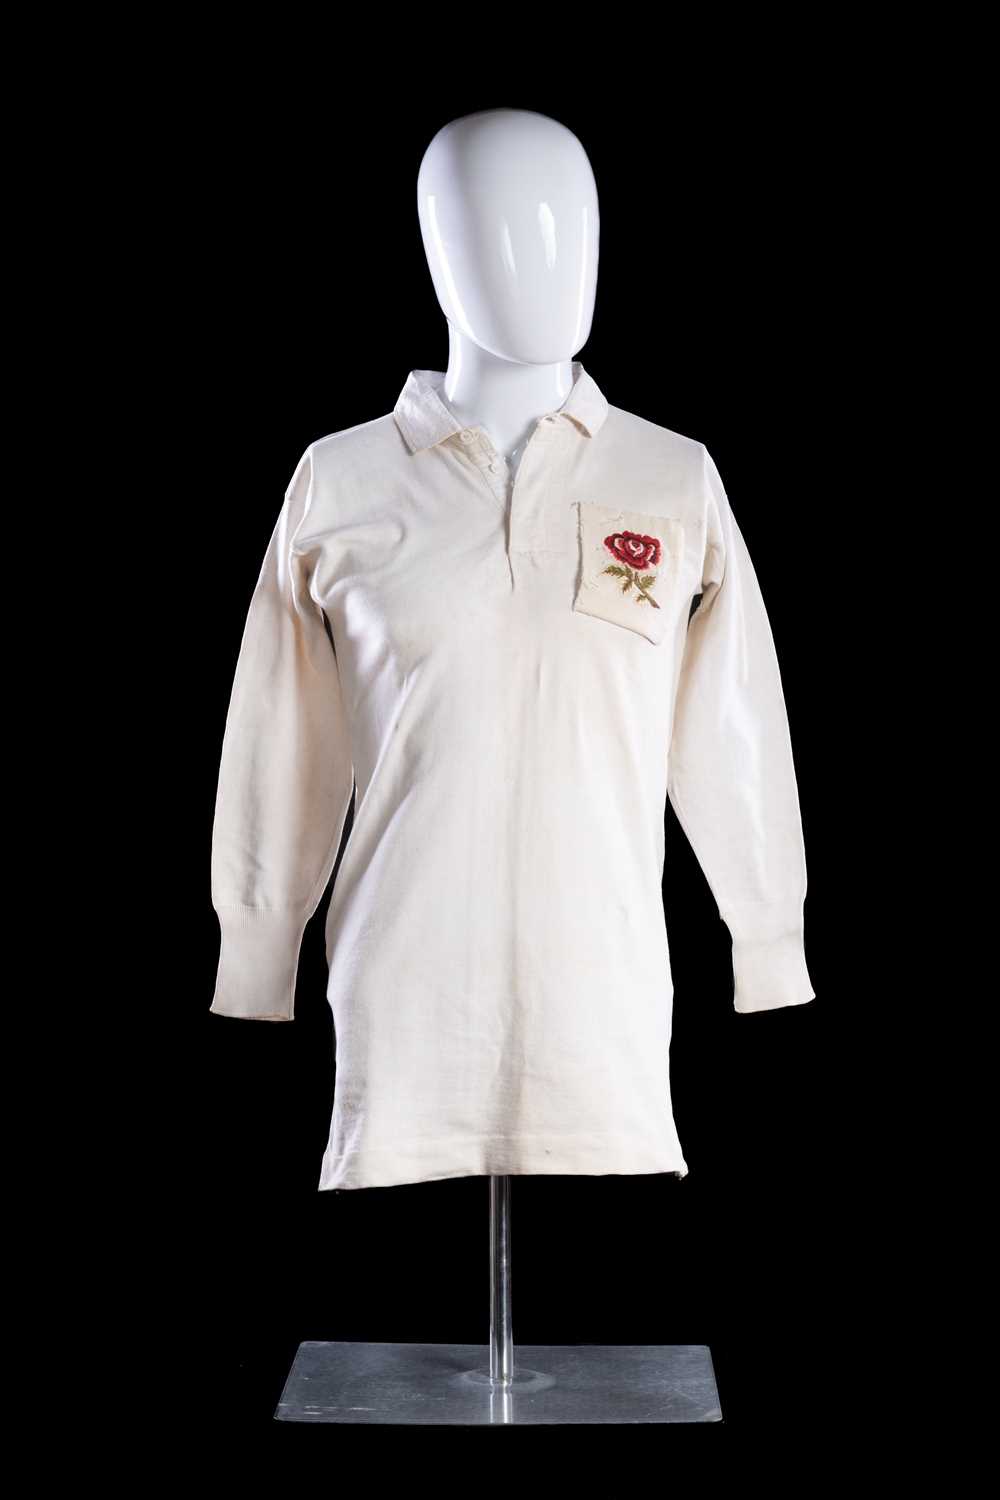 A c.1910 ENGLAND INTERNATIONAL RUGBY UNION MATCH-WORN JERSEY VERSUS WALES All white jersey applied